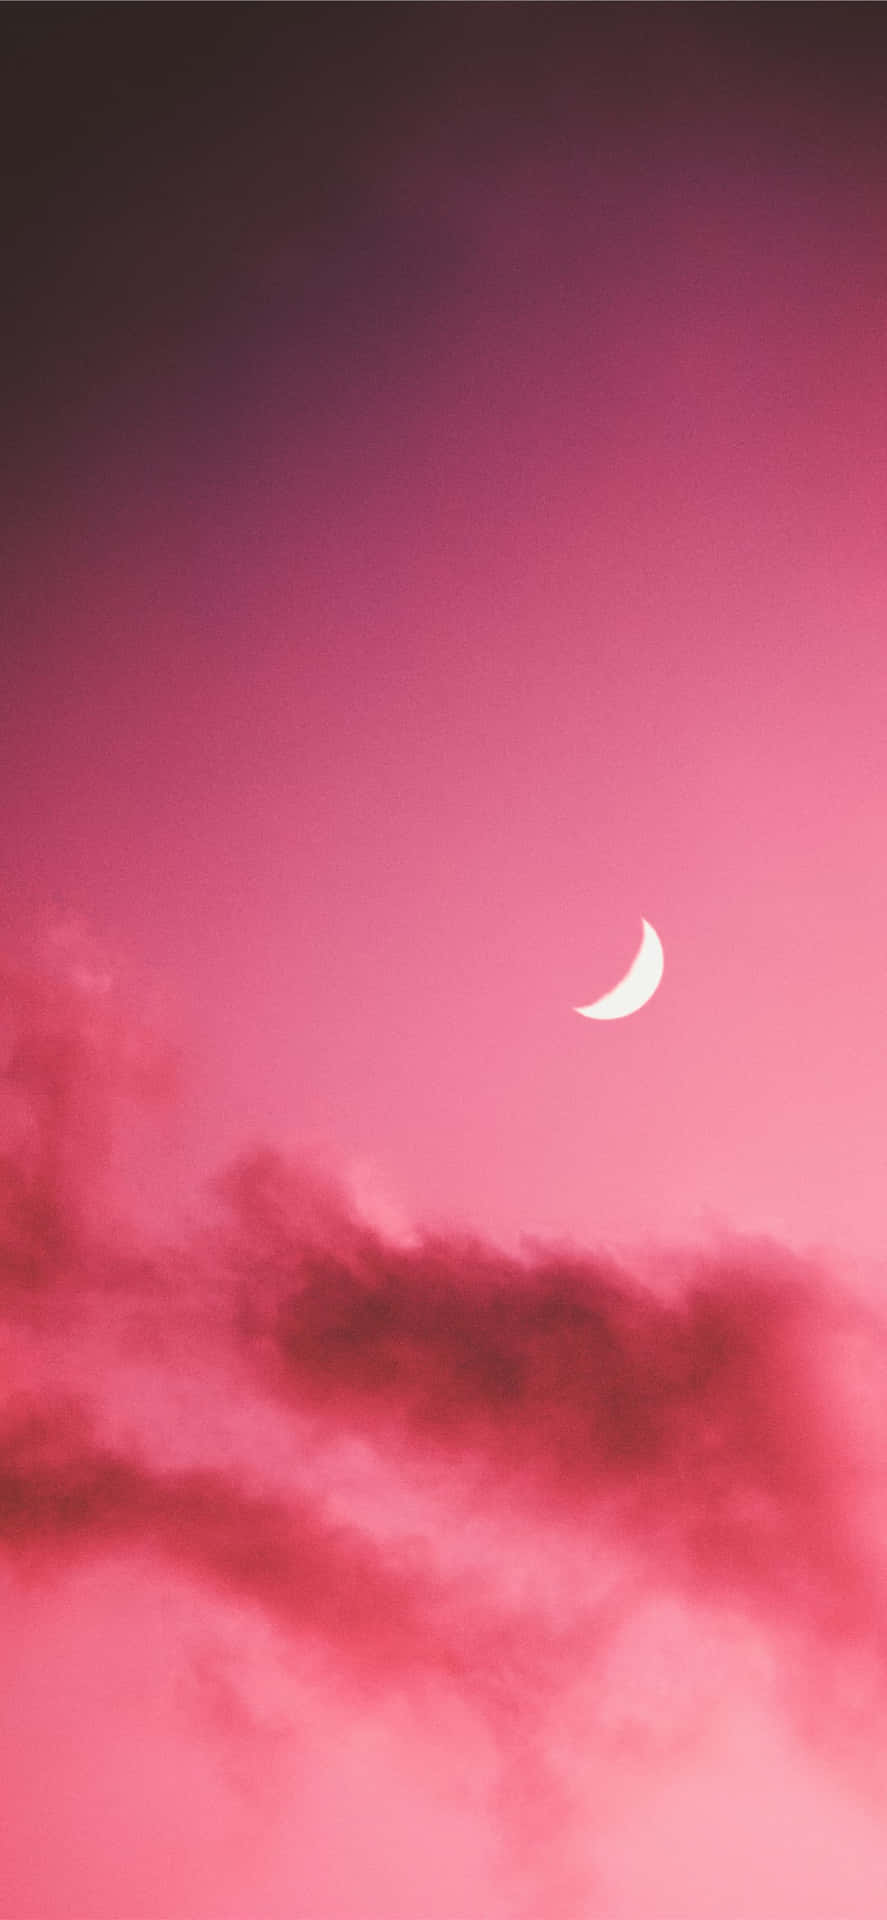 A memorable photo of a beautiful pink moon rising in the night sky Wallpaper